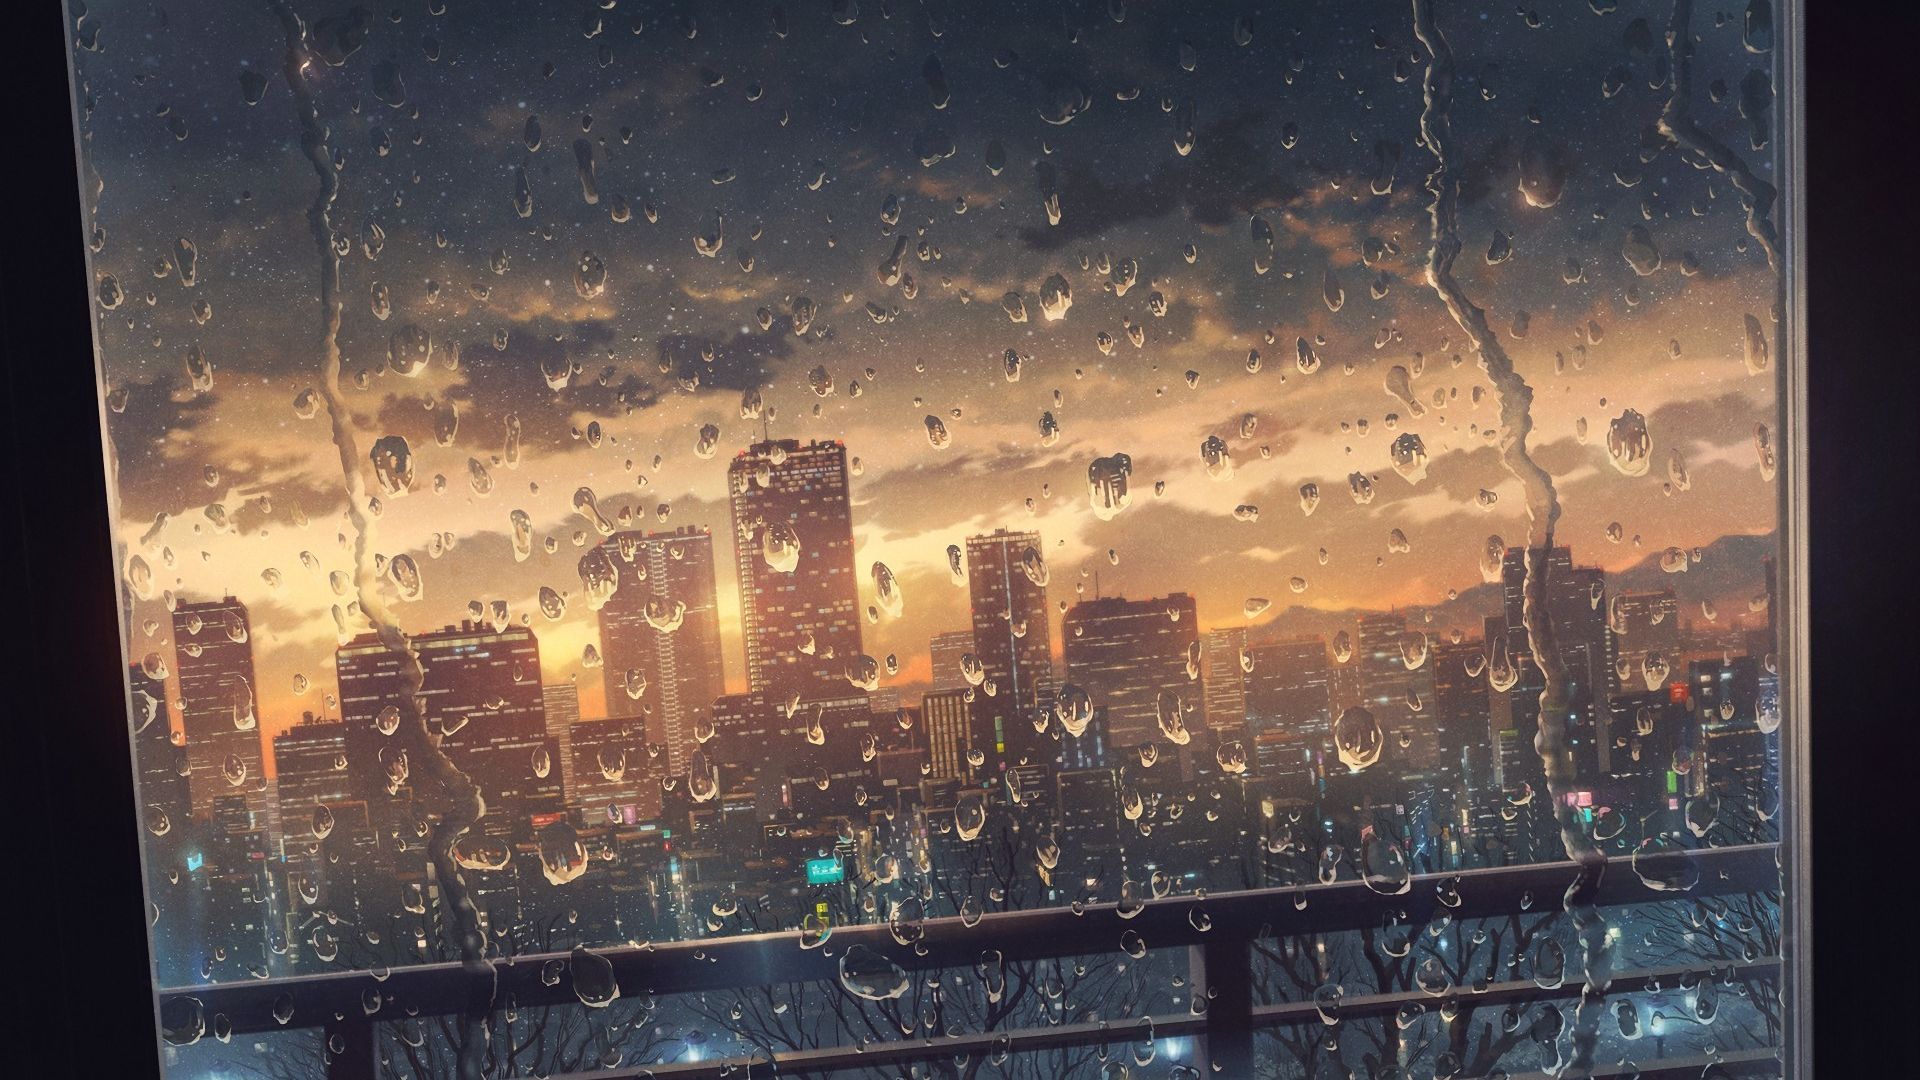 Wallpaper Window glass, surface, water drops, anime, city